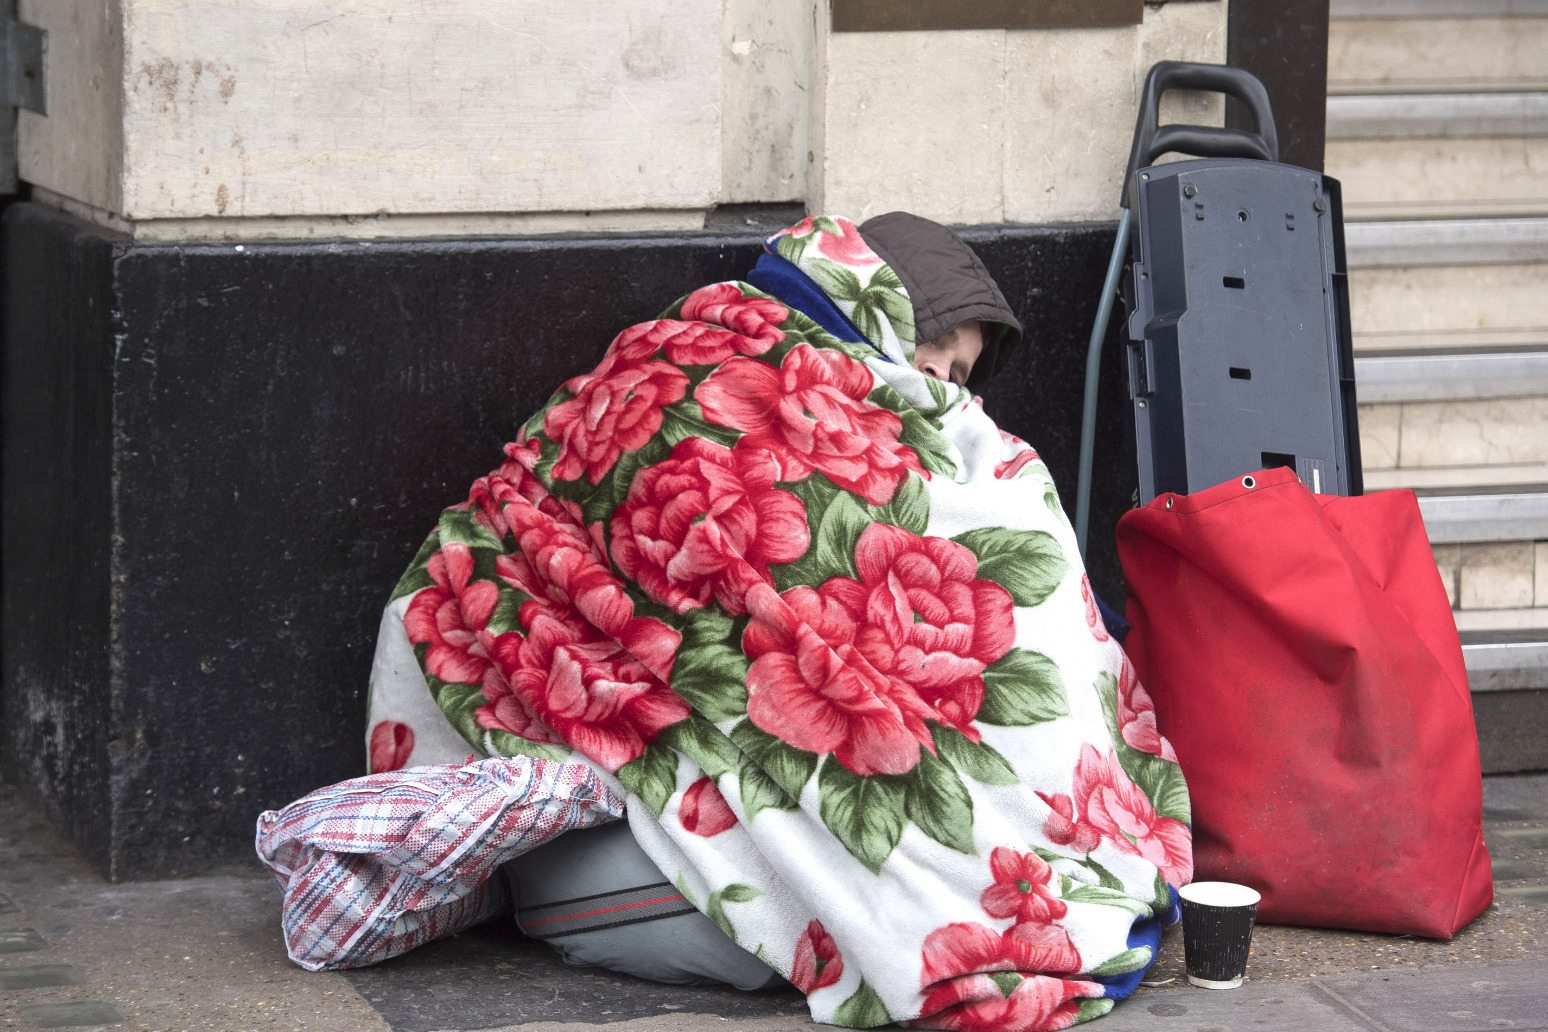 316 million pounds to tackle homelessness announced thumbnail